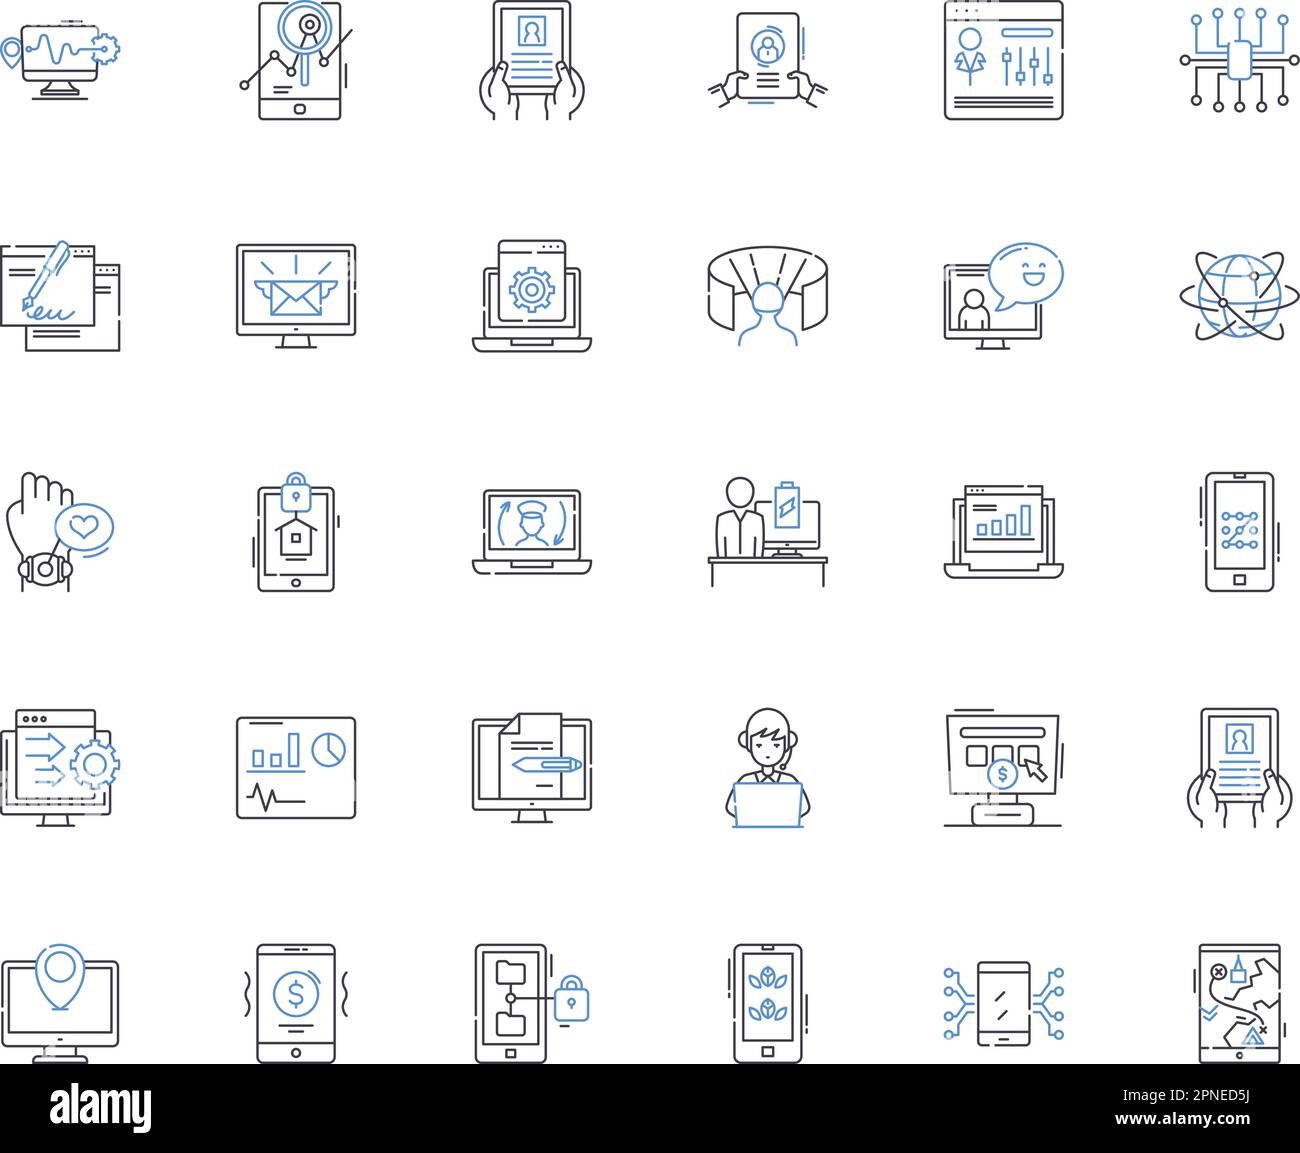 Electronics line icons collection. Circuitry, Voltage, Amplifier, Transistor, Capacitor, Microcontroller, Diode vector and linear illustration Stock Vector